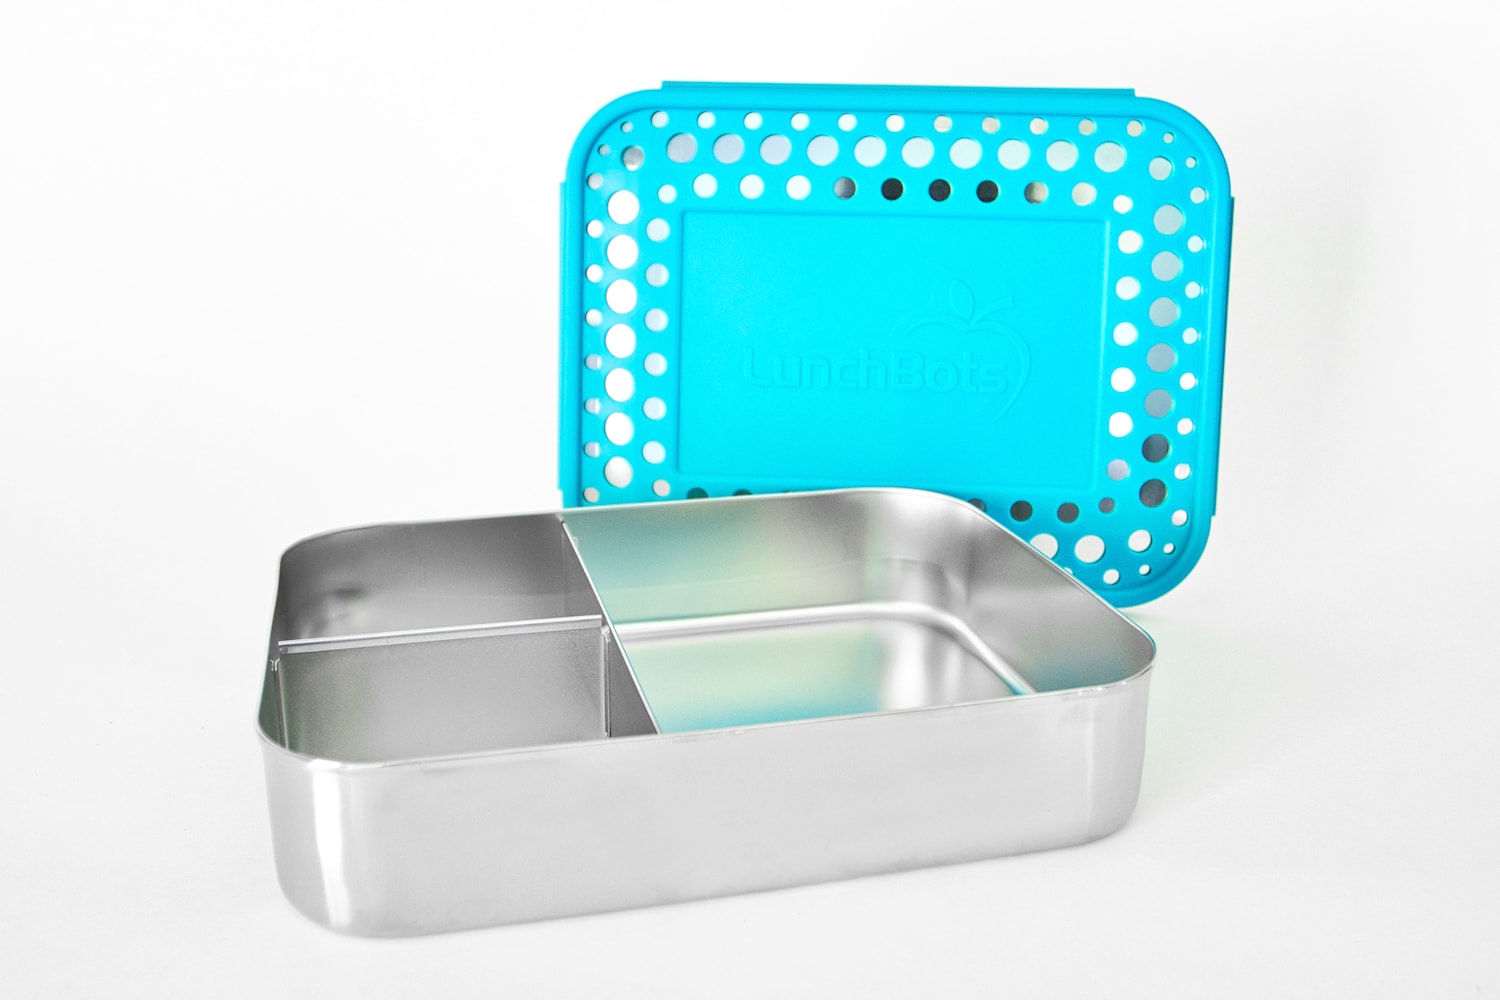 LunchBots Snack Packer Stainless Steel Bento Box